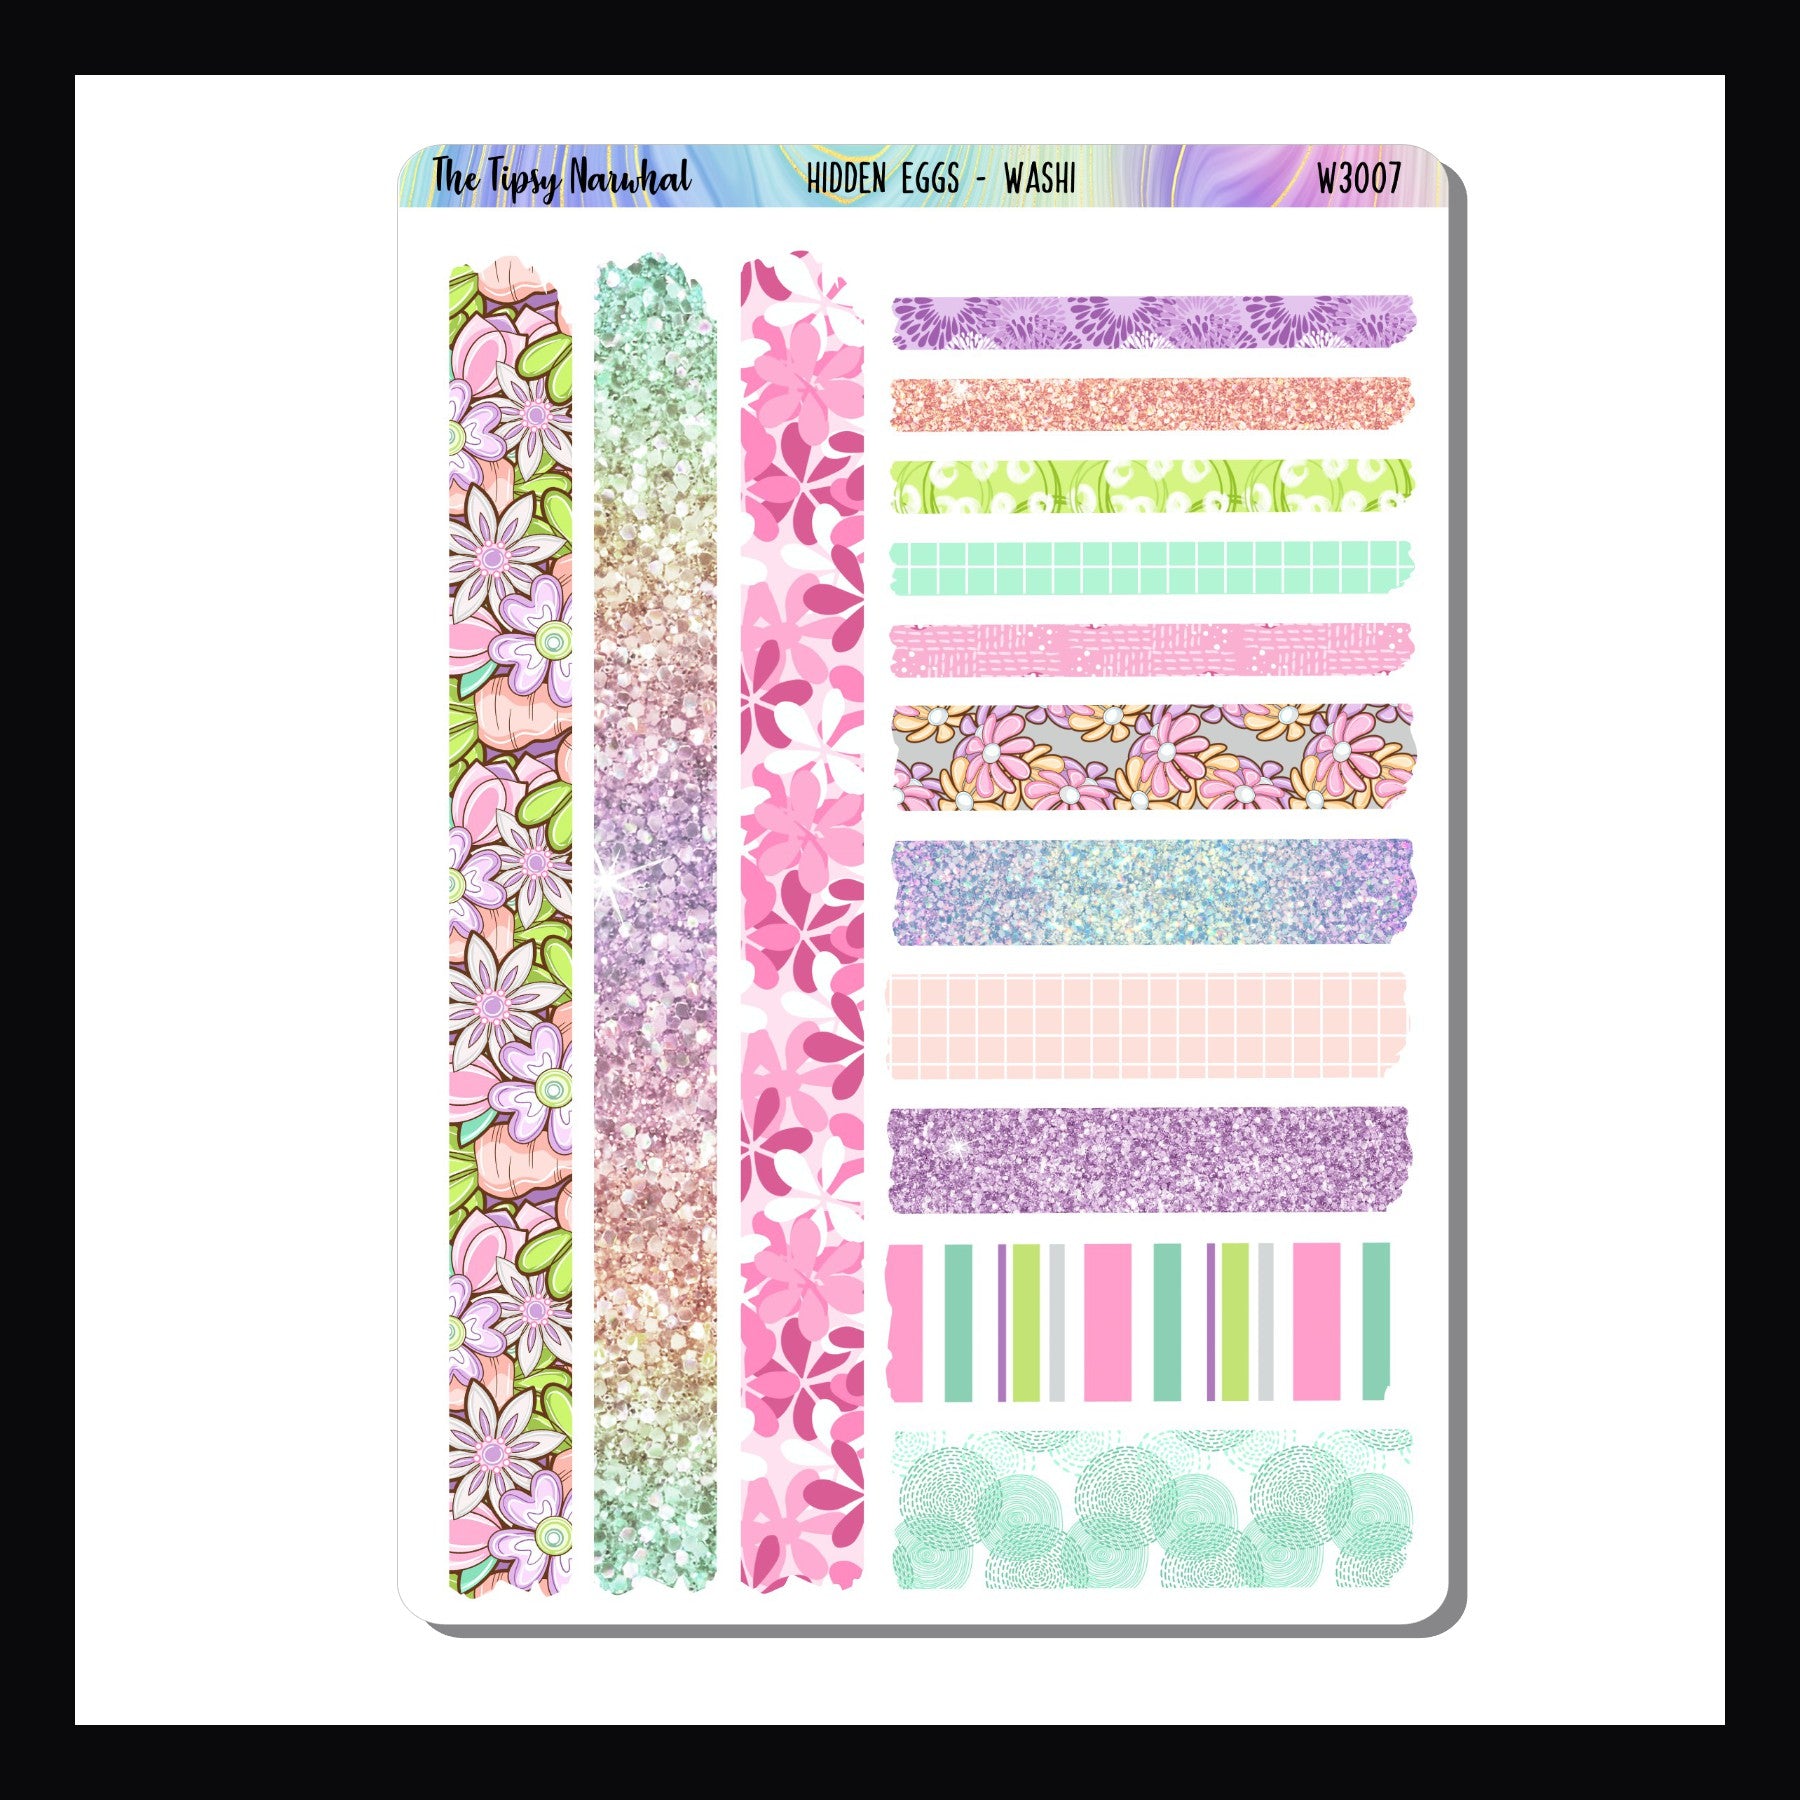 Hidden Eggs Vertical Kit - Washi Sheet Add-on.  The Washi sheet features multiple washi strip stickers in various sizes.  All washi designs coordinate with the Hidden Eggs Kit design.